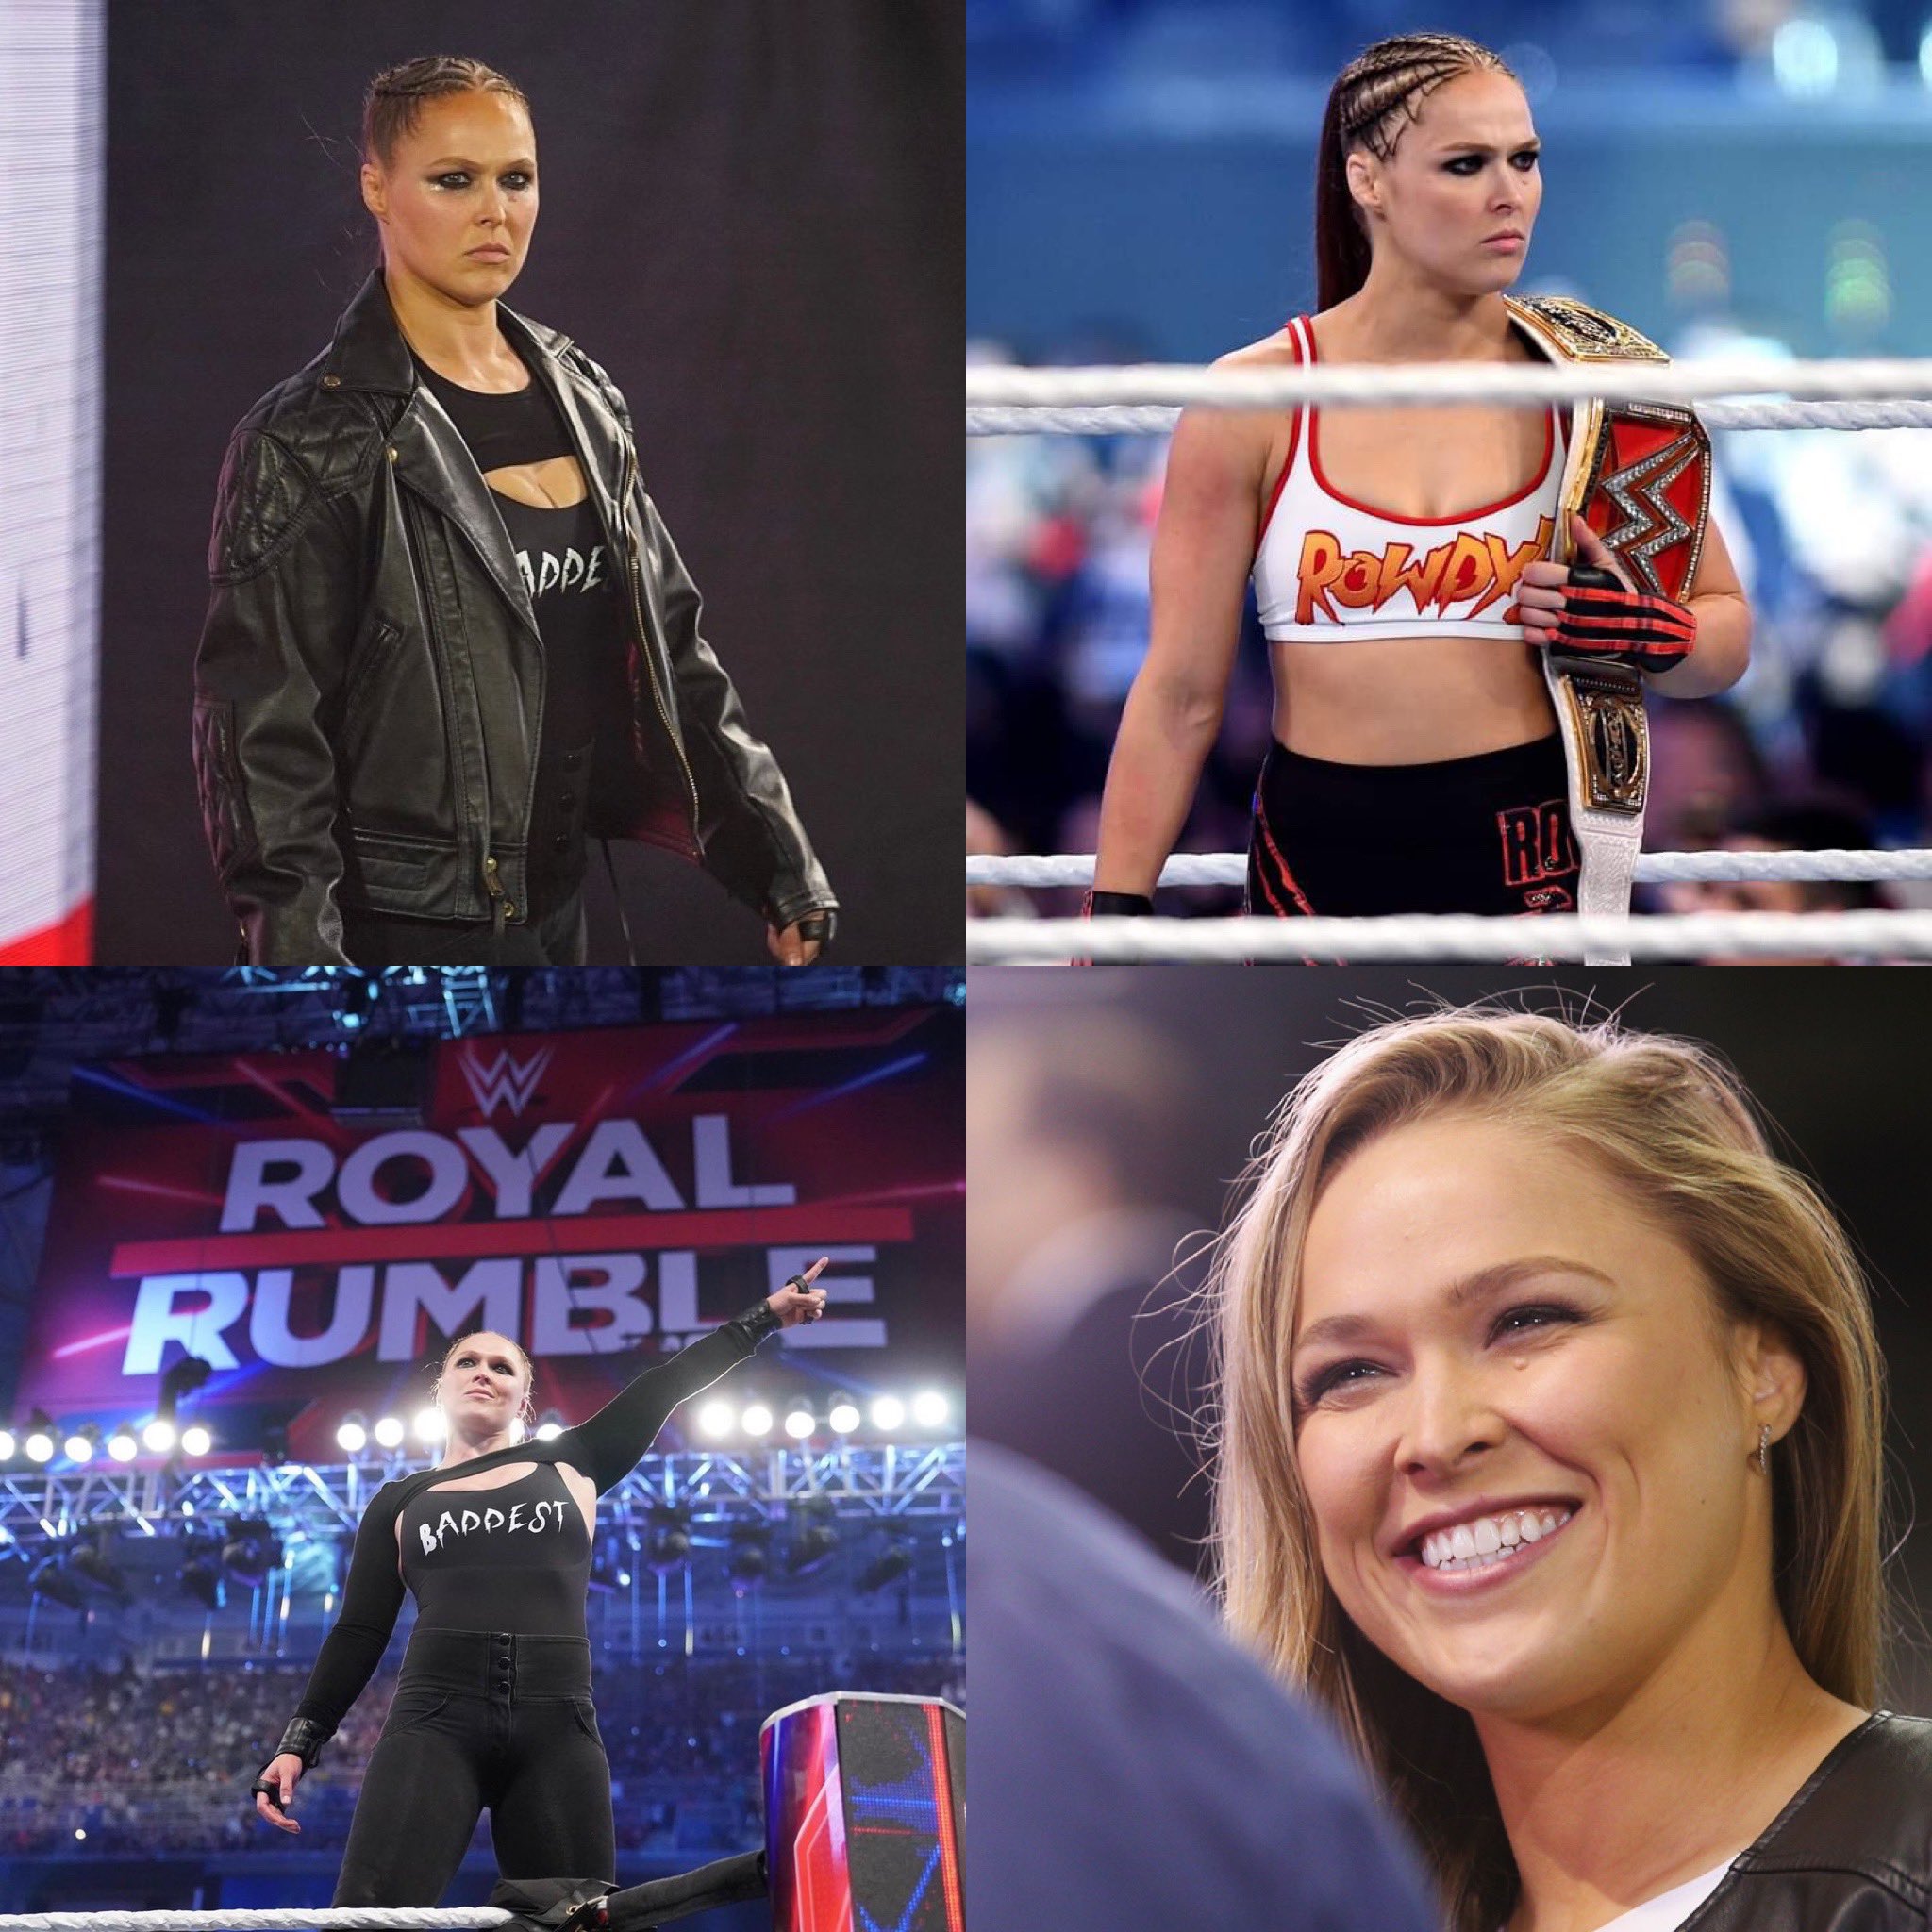 Happy Birthday to The Baddest Woman on the Planet Ronda Rousey! 